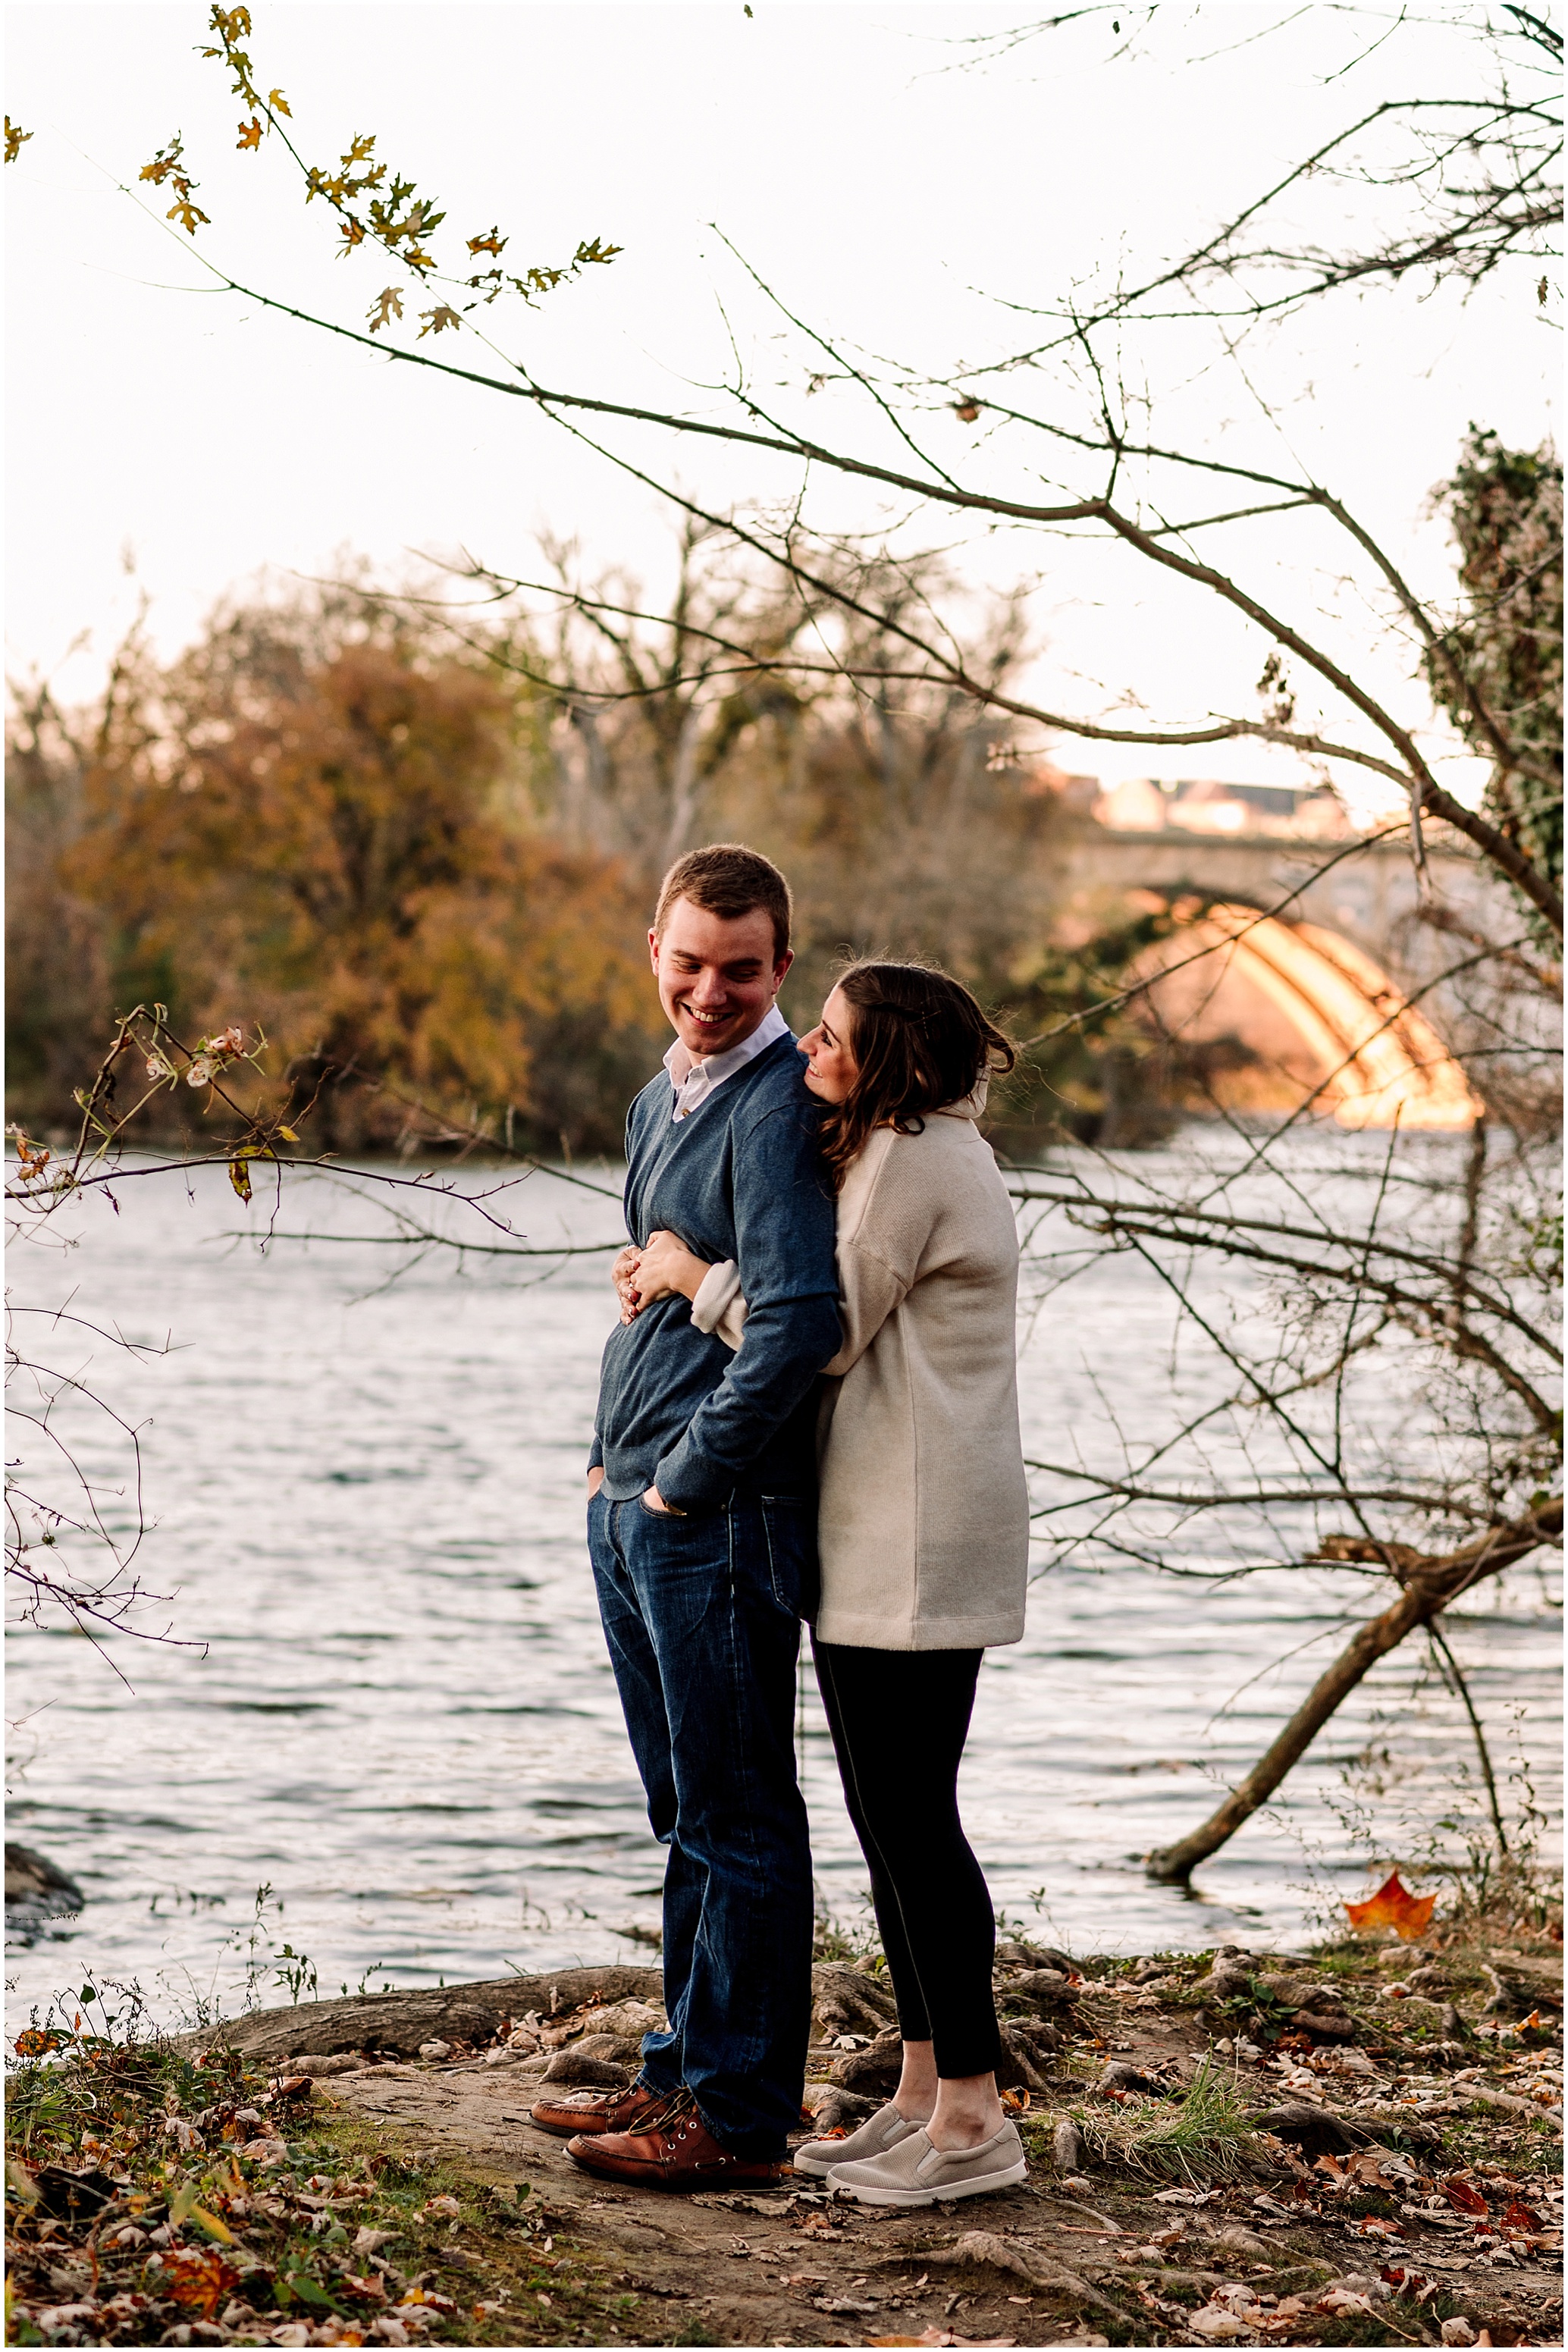 Hannah Leigh Photography Theodore Roosevelt Island Engagement Session_6703.jpg